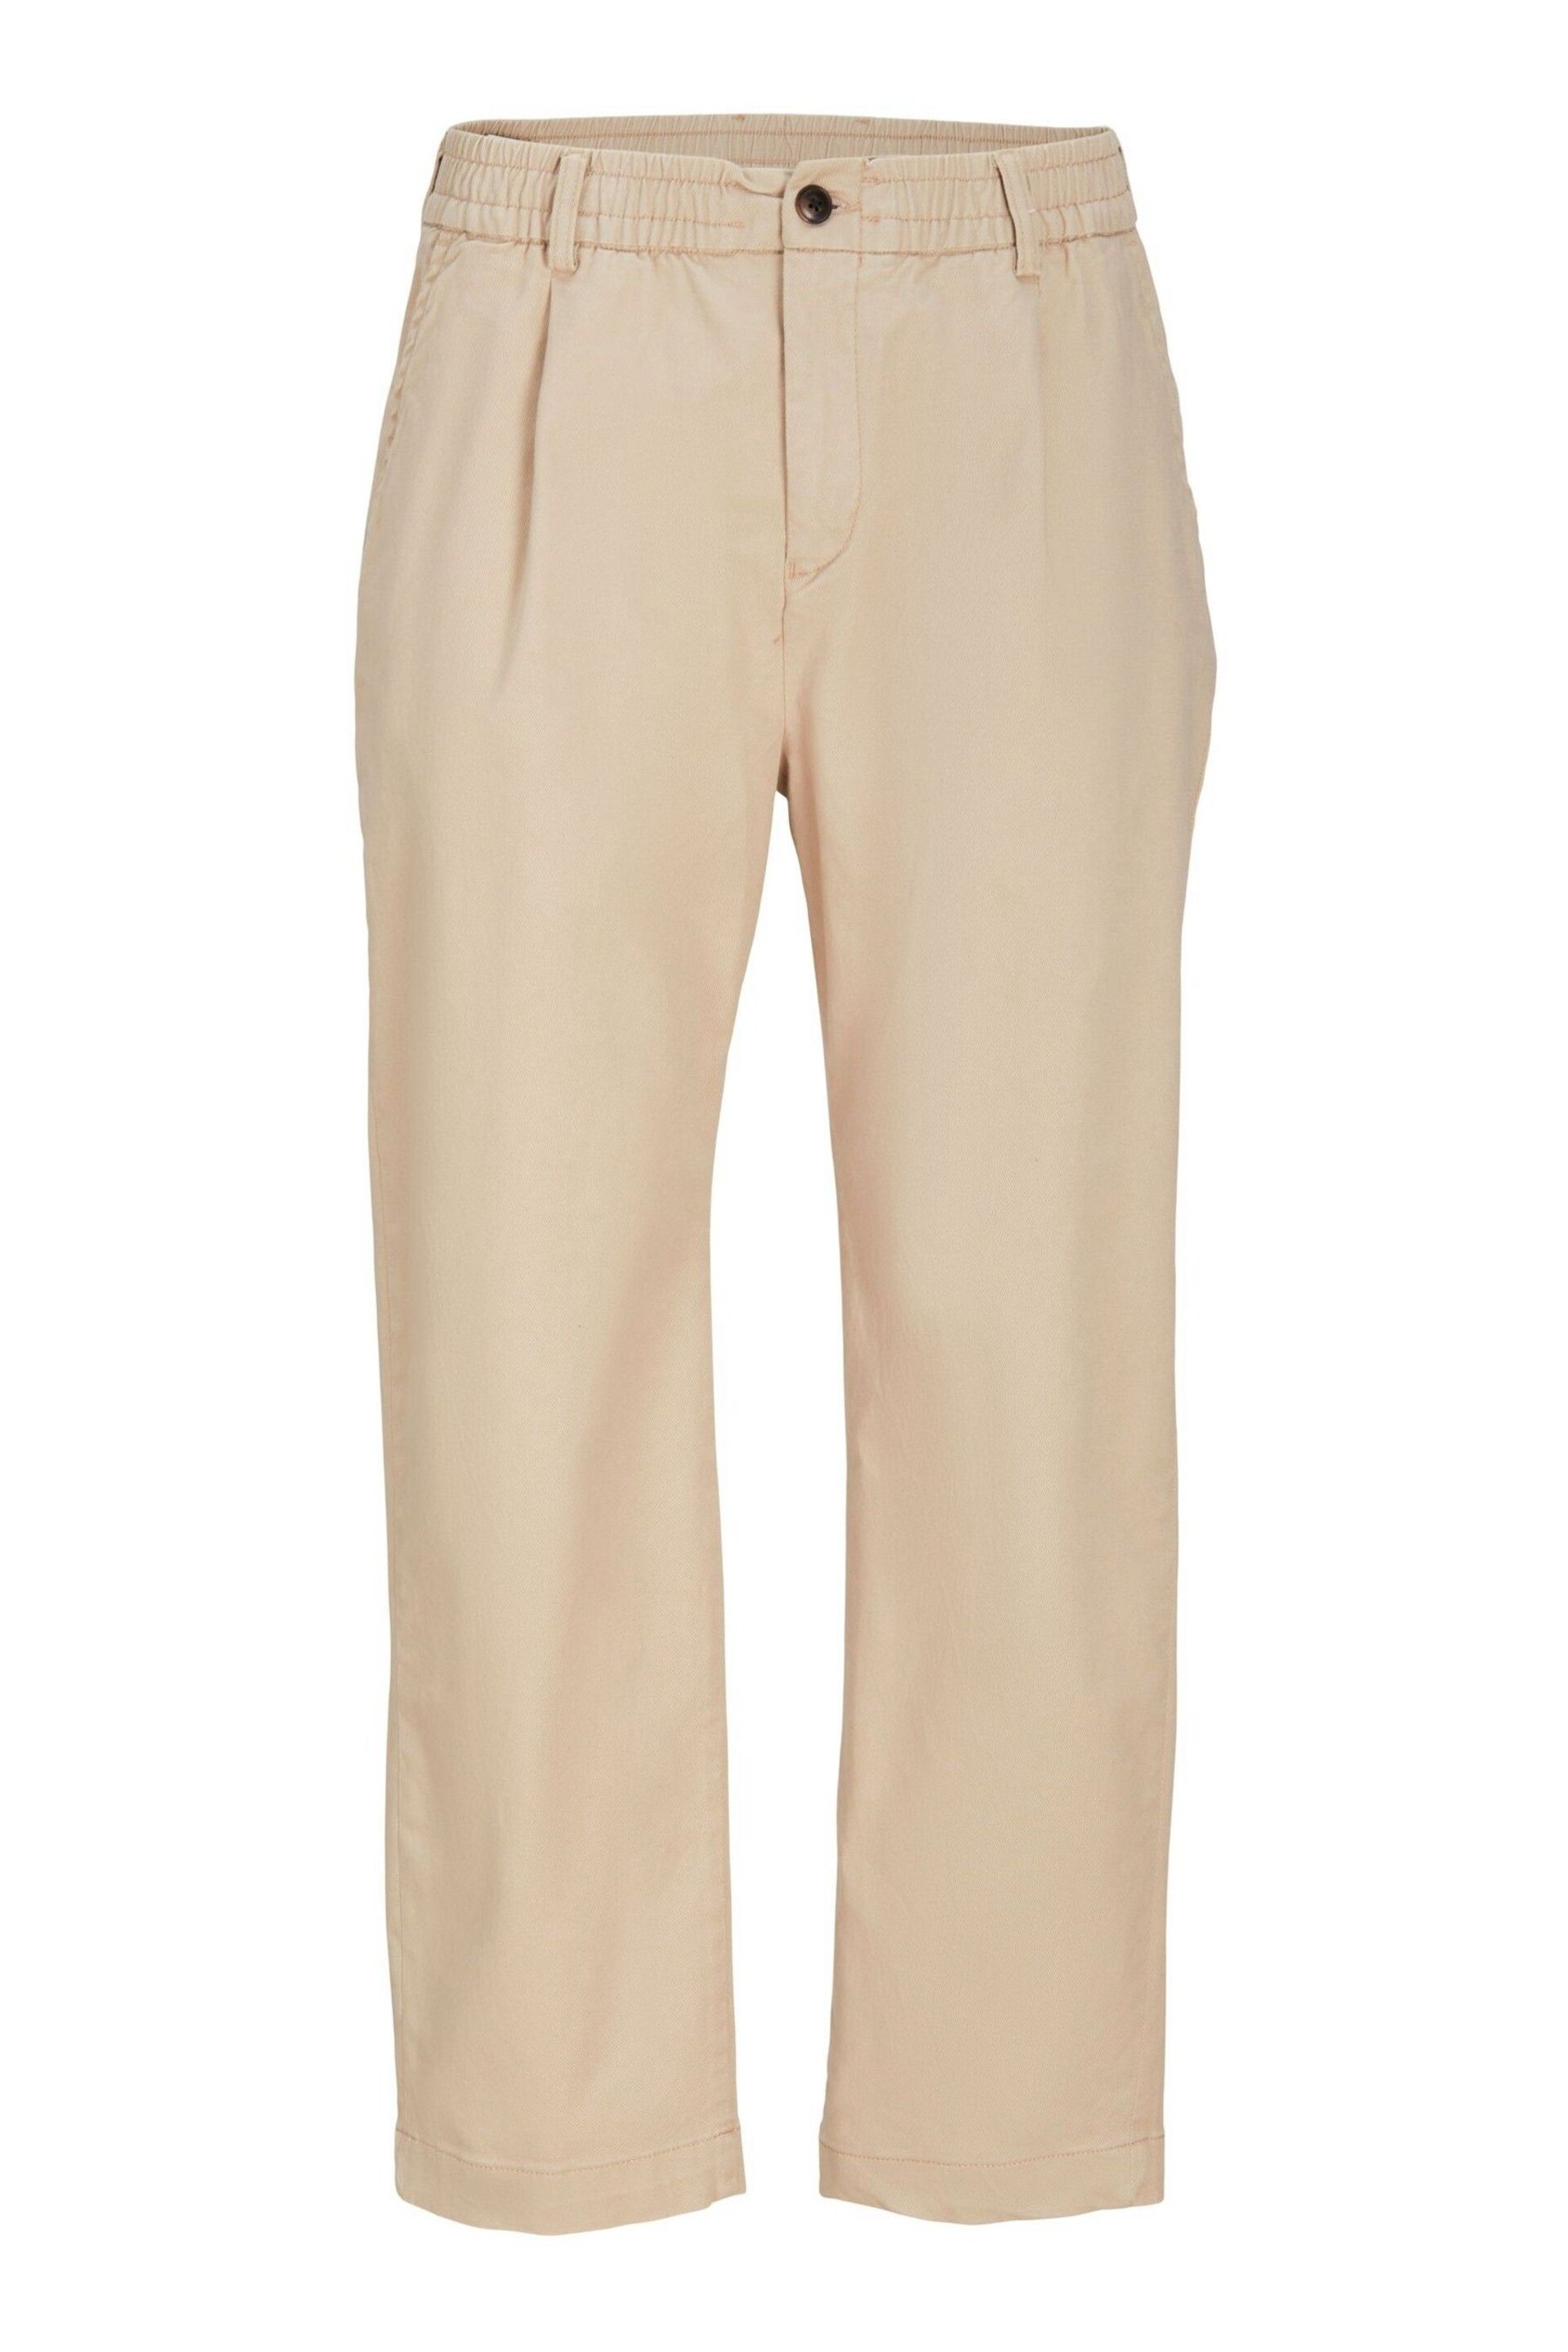 JACK & JONES Brown Wide Fit Relaxed Trousers - Image 7 of 8